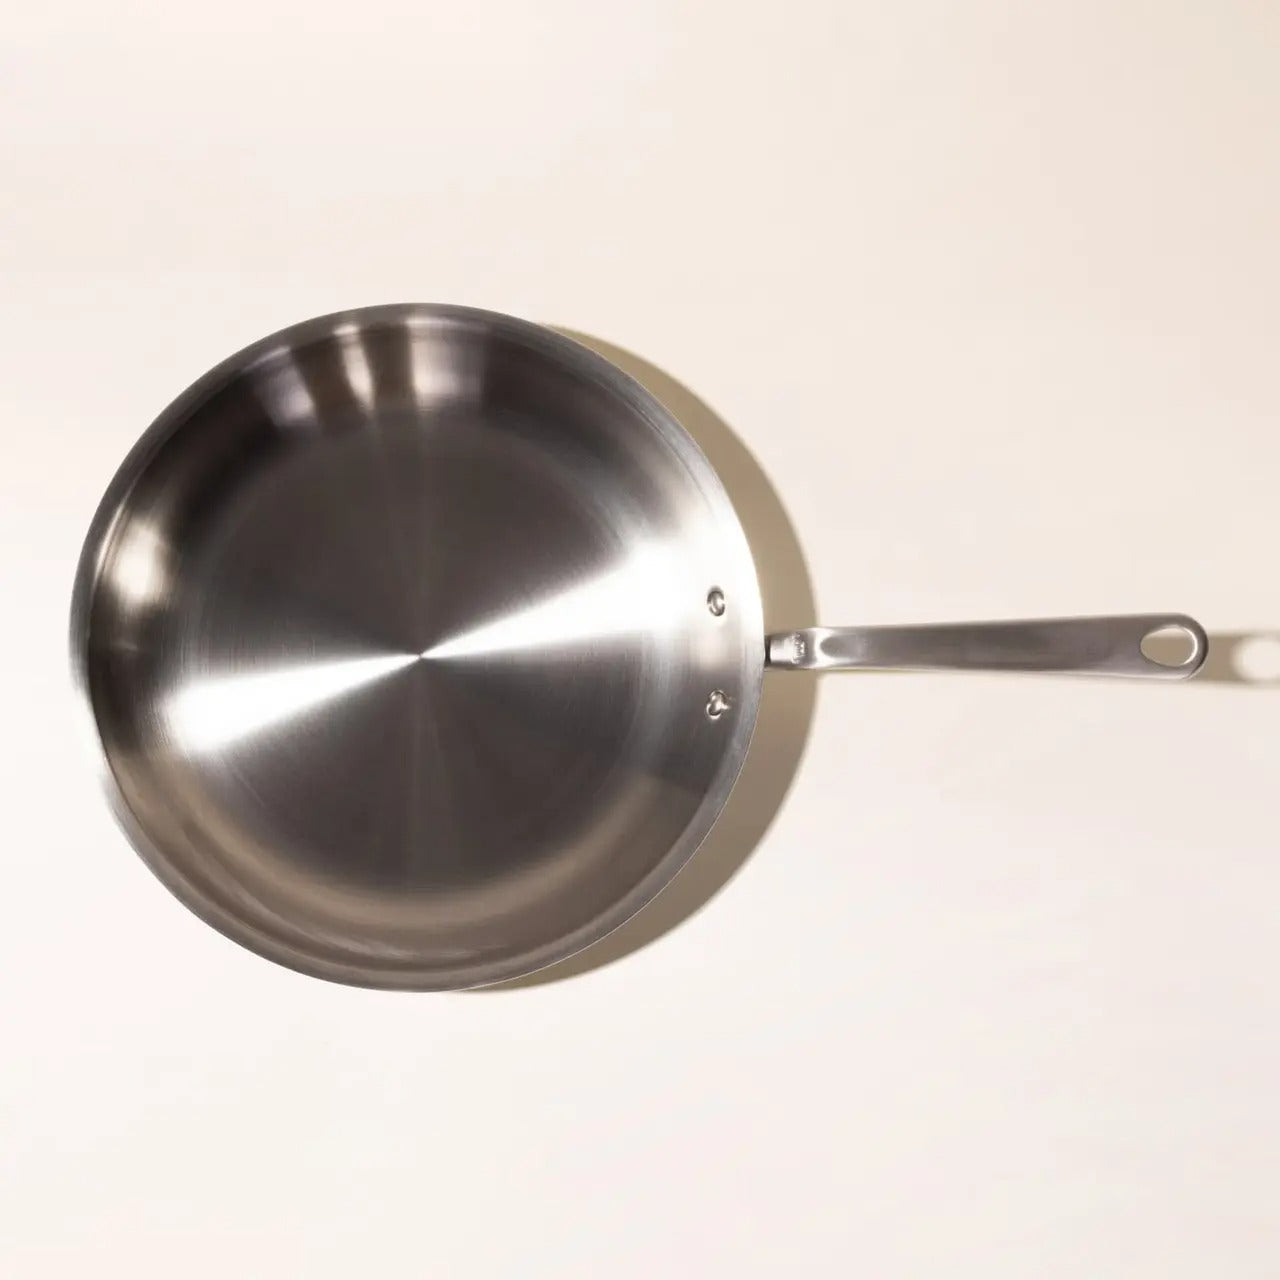 MADE IN Stainless Steel Fry Pan - 8", 10", 12"